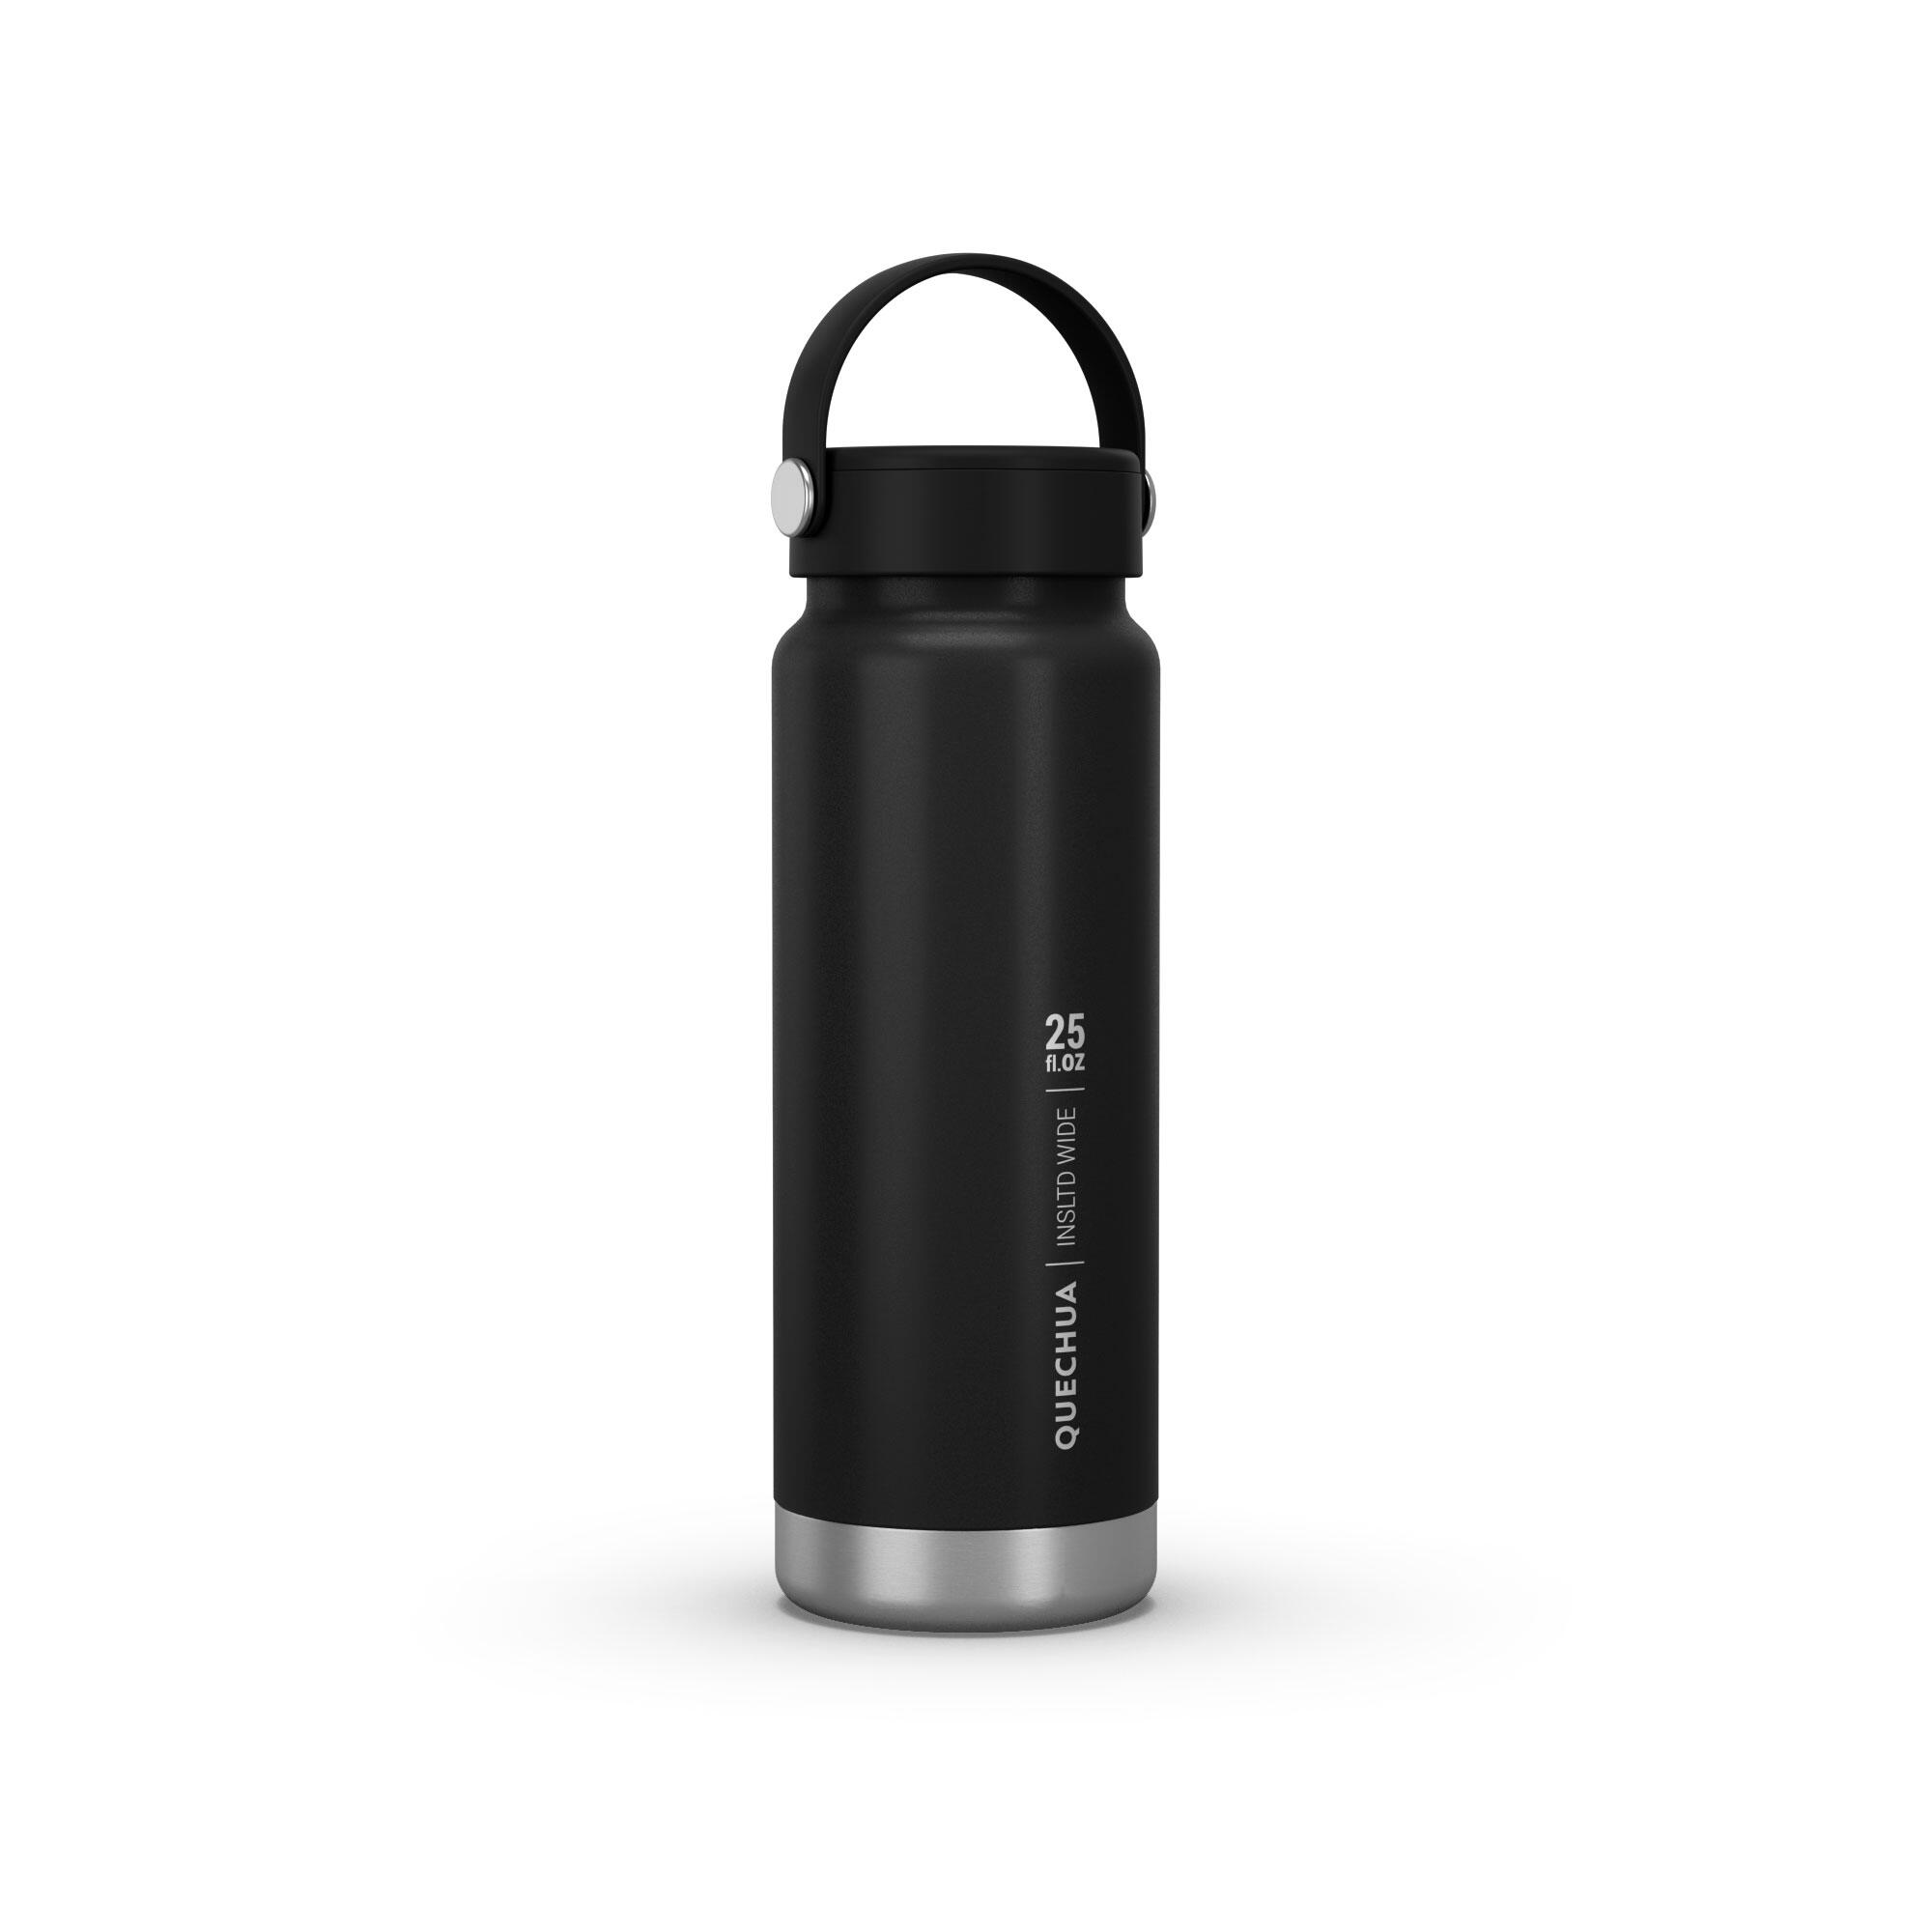 QUECHUA Isothermal Flask MH100 (s/steel double wall with air gap) 0.75wide opening Black